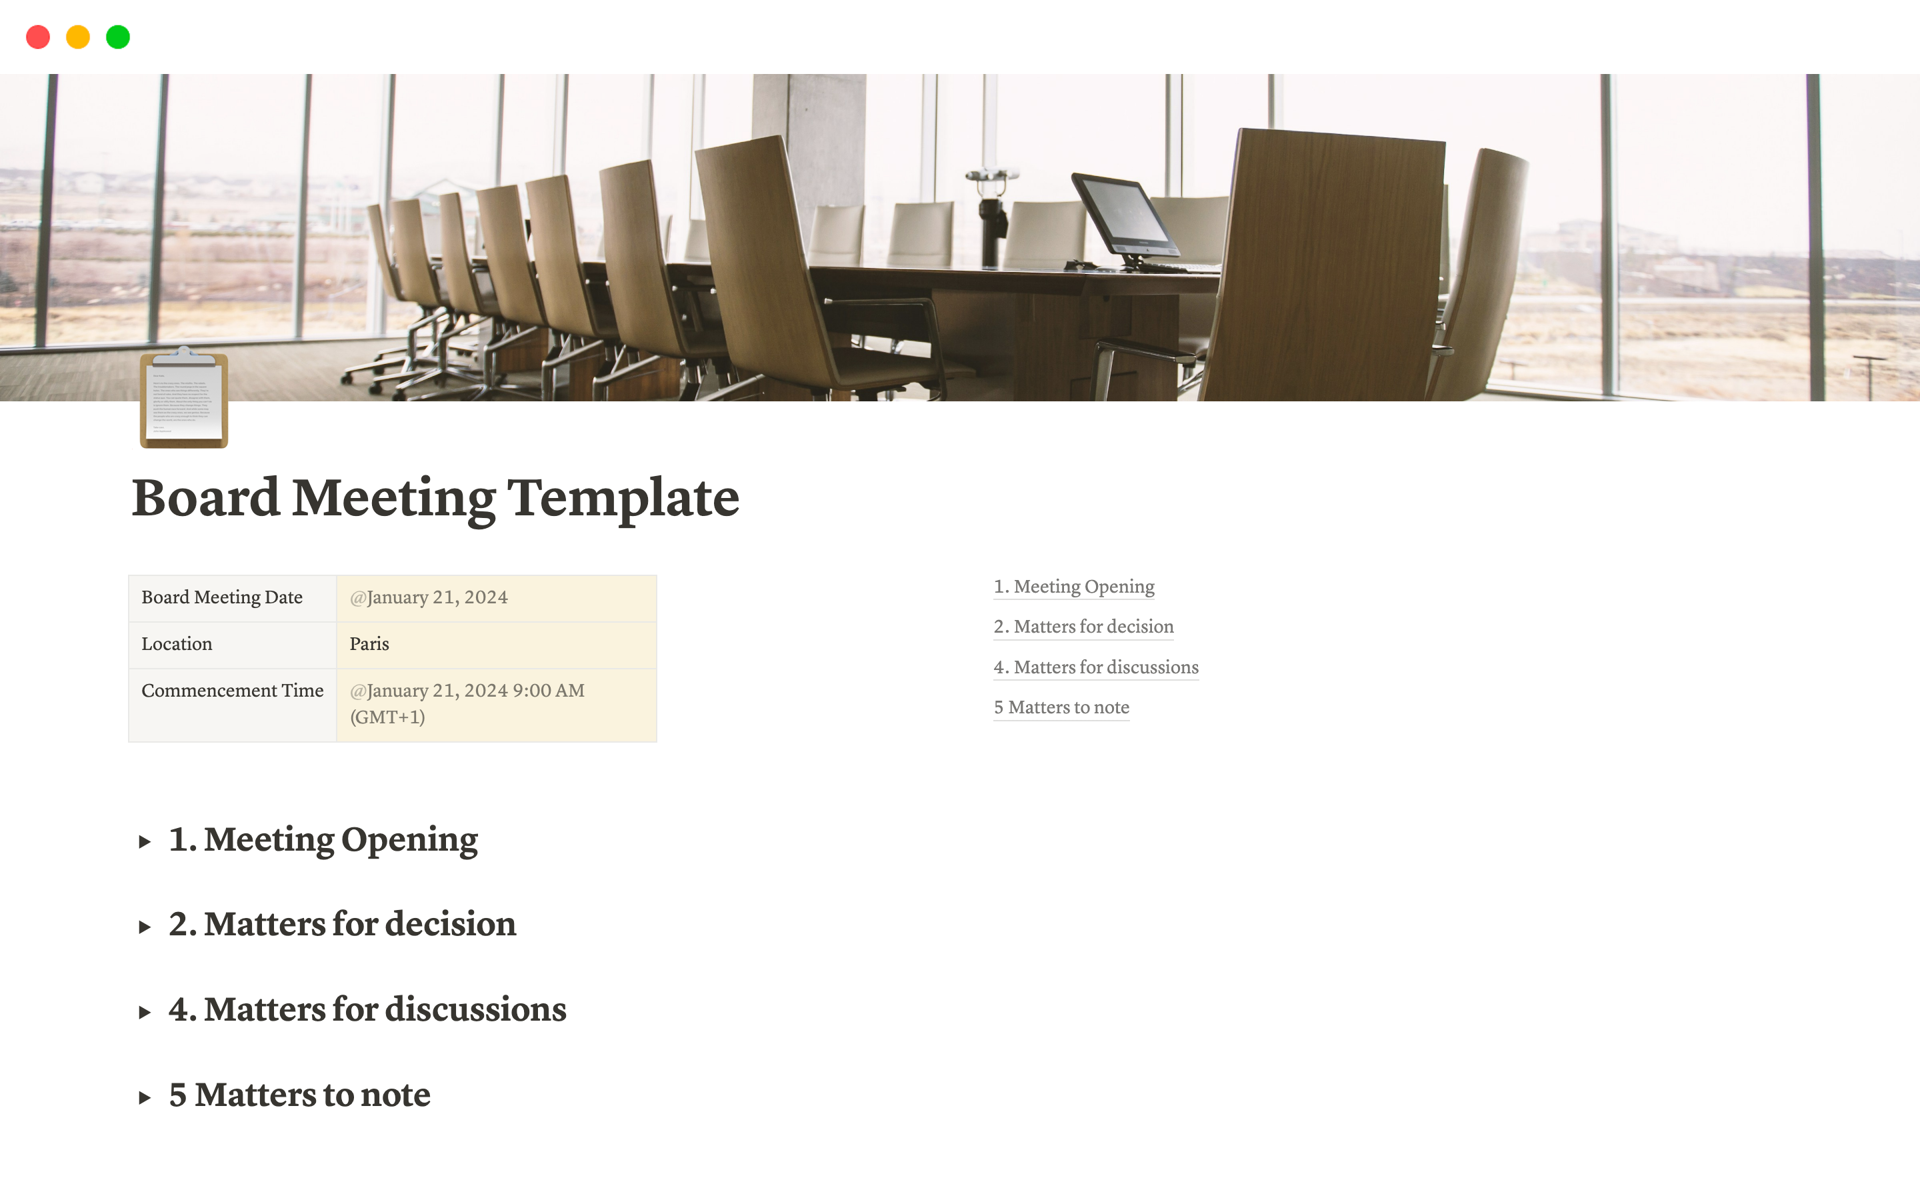 A template preview for Board Meetings for Start-ups and SMBs